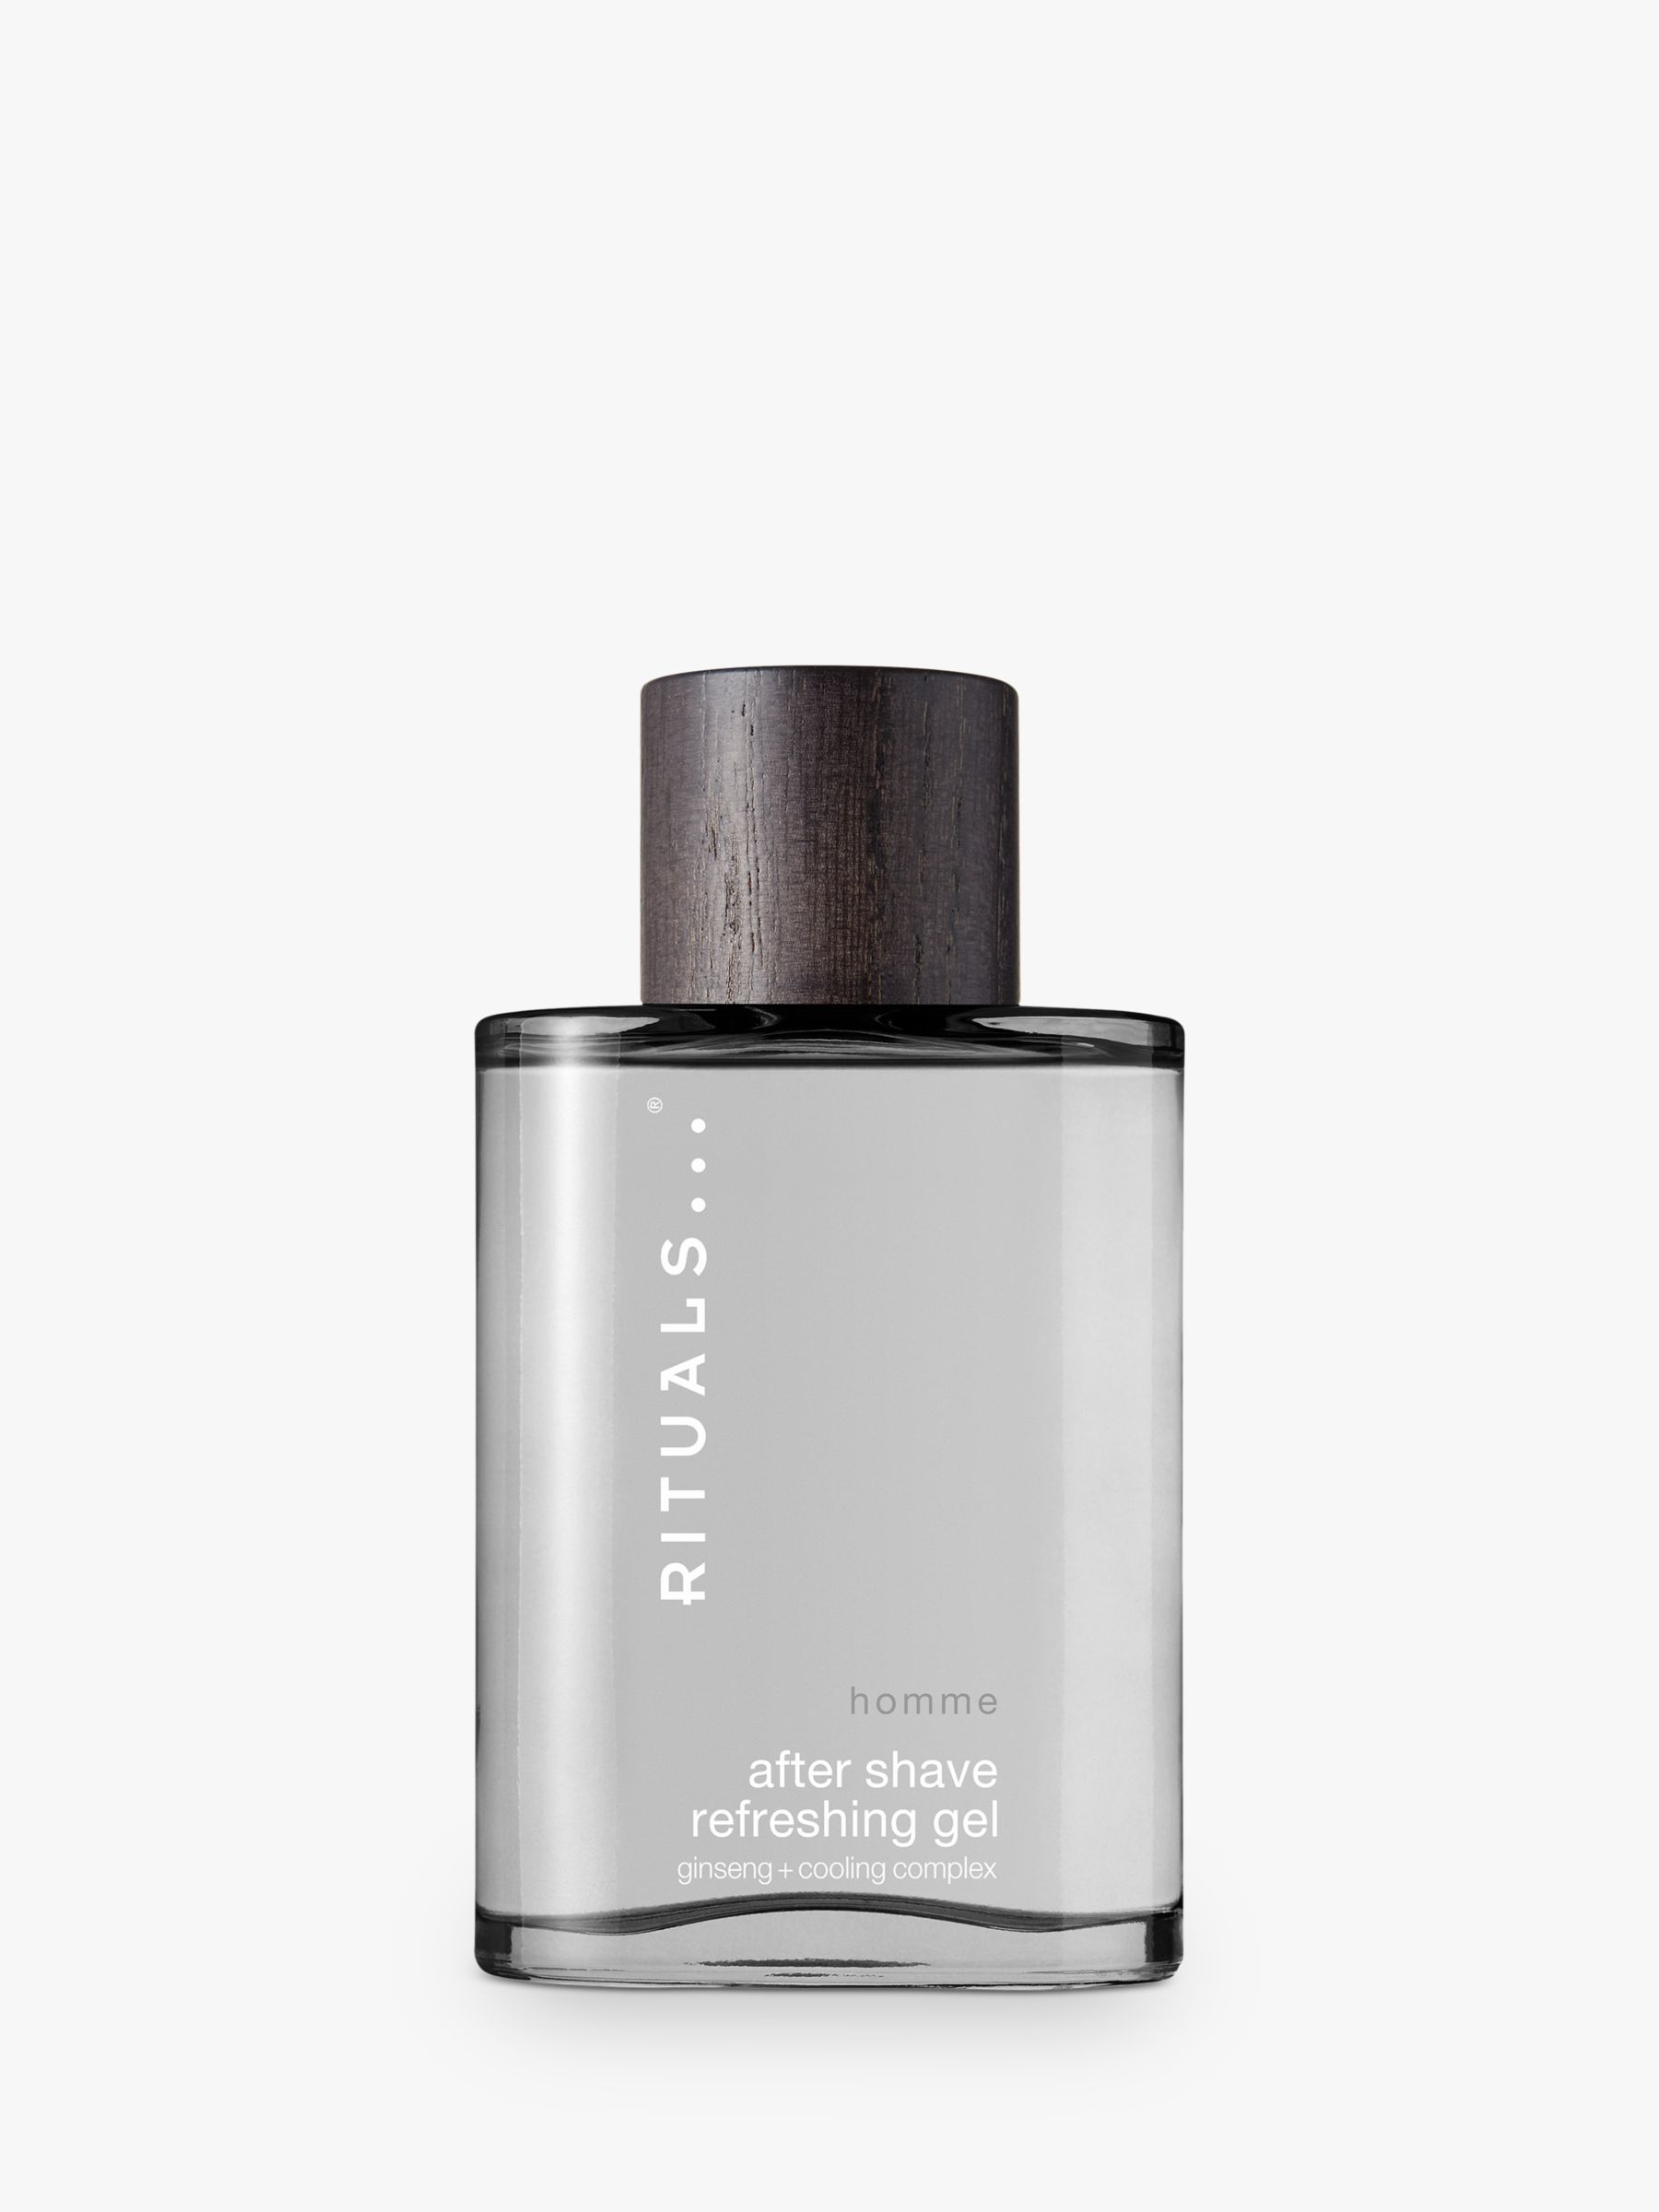 Rituals Homme After Shave Refreshing Gel, 100ml 1